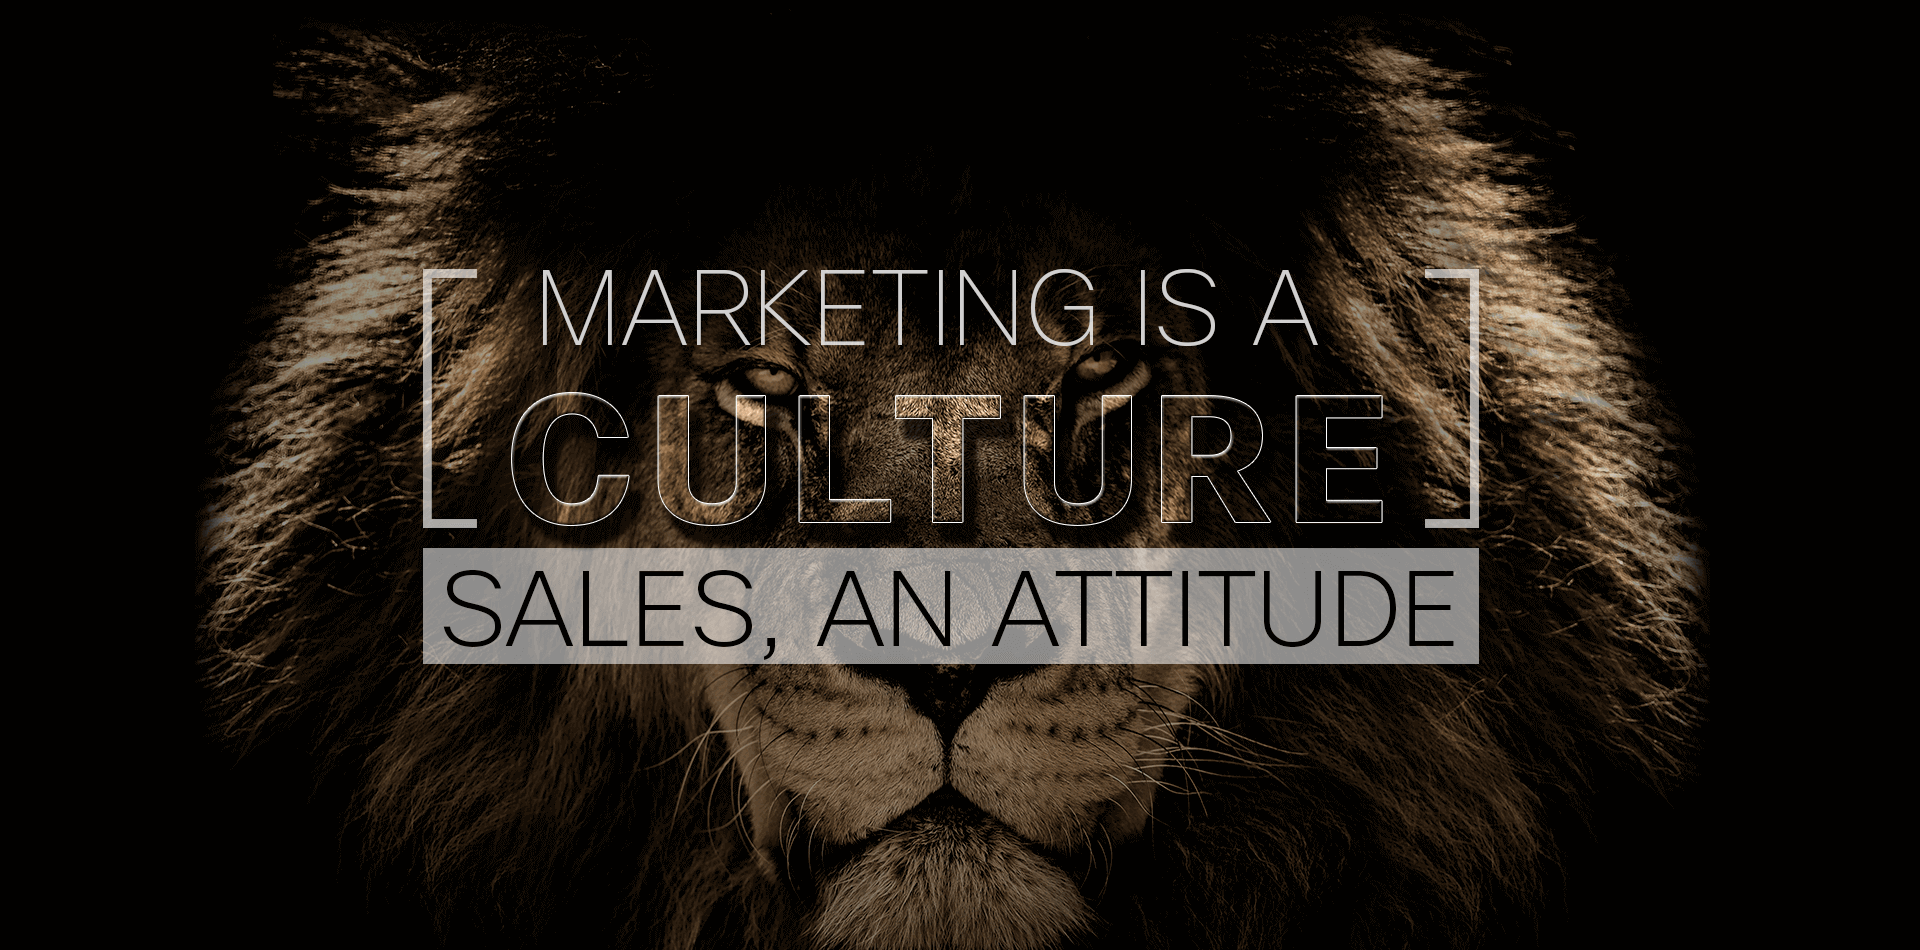 Marketing is a culture sales, an attitude.